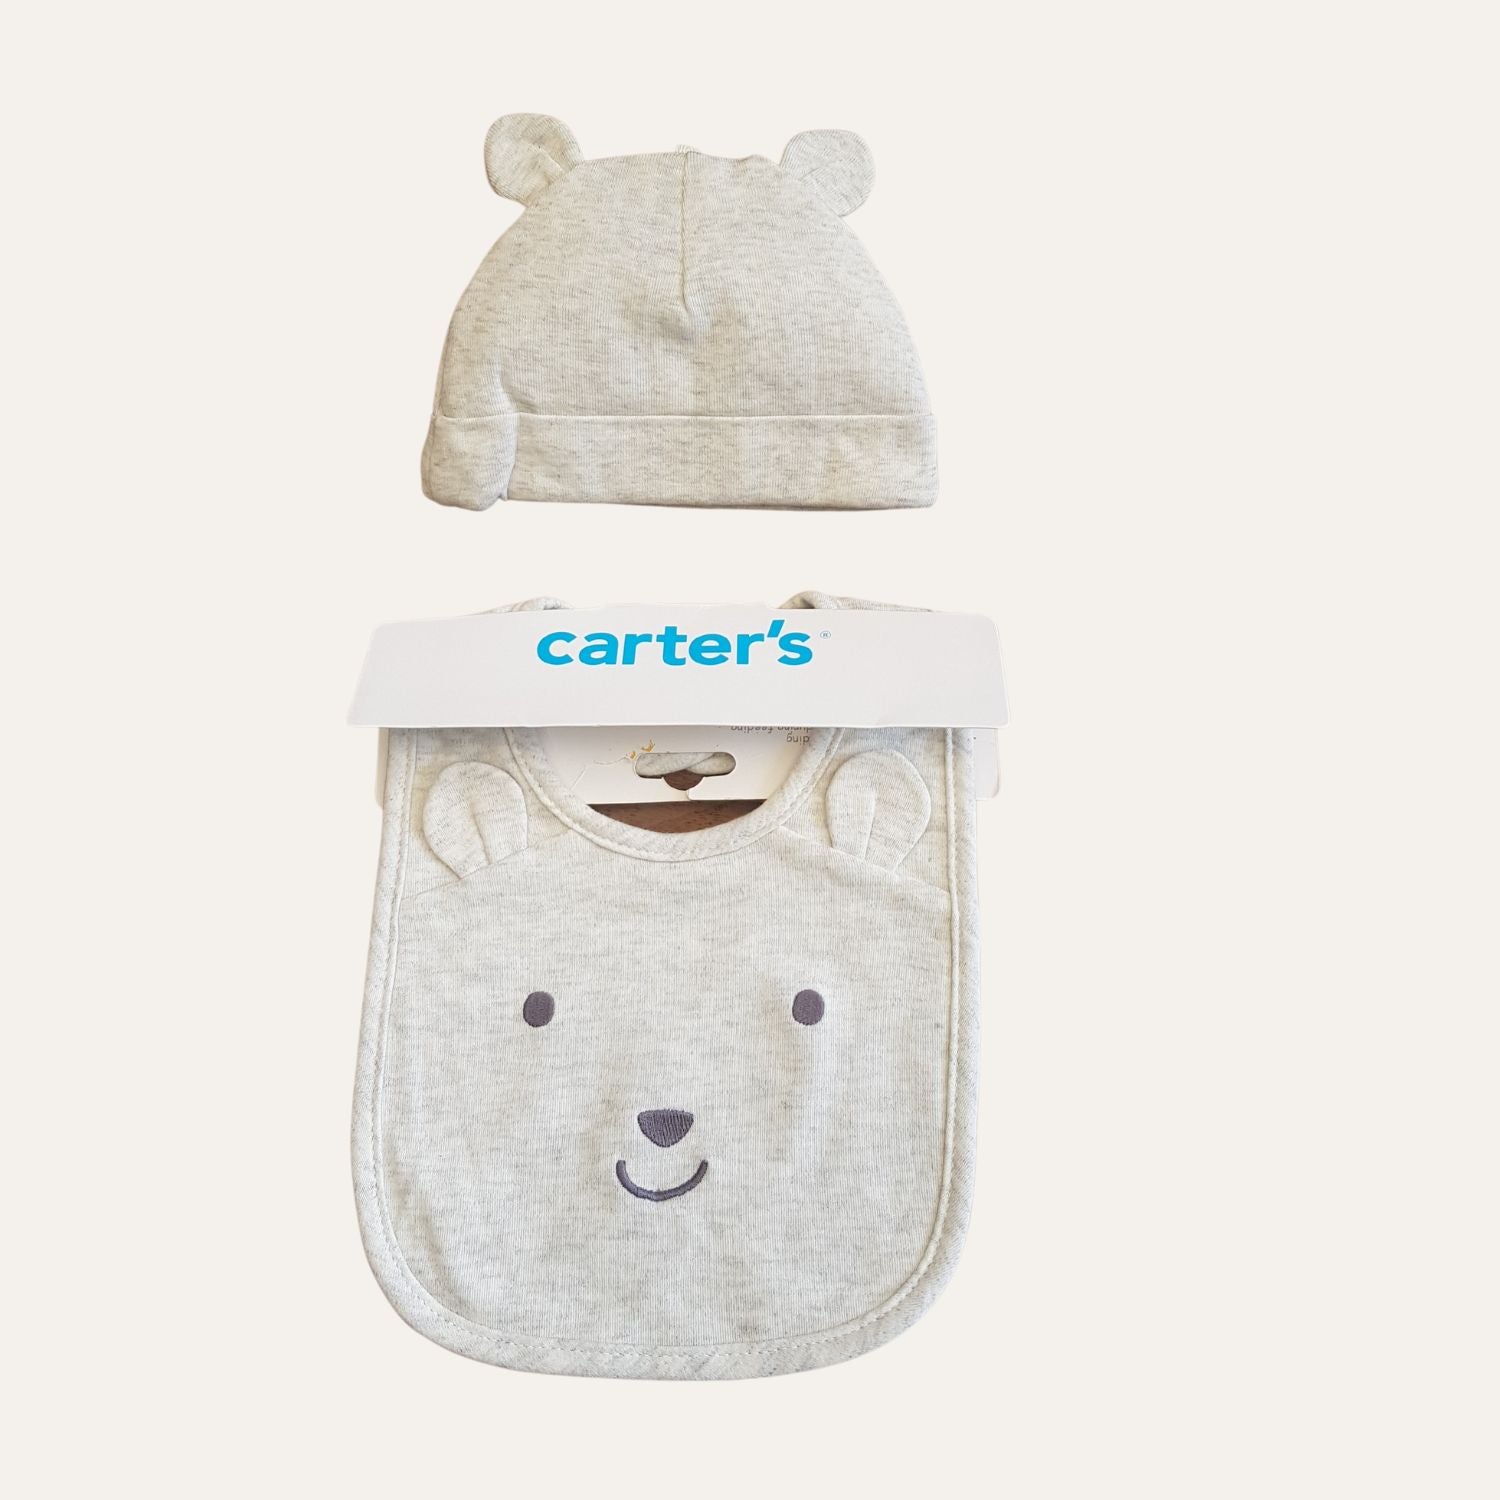 Adorable and practical baby accessory set for everyday use!